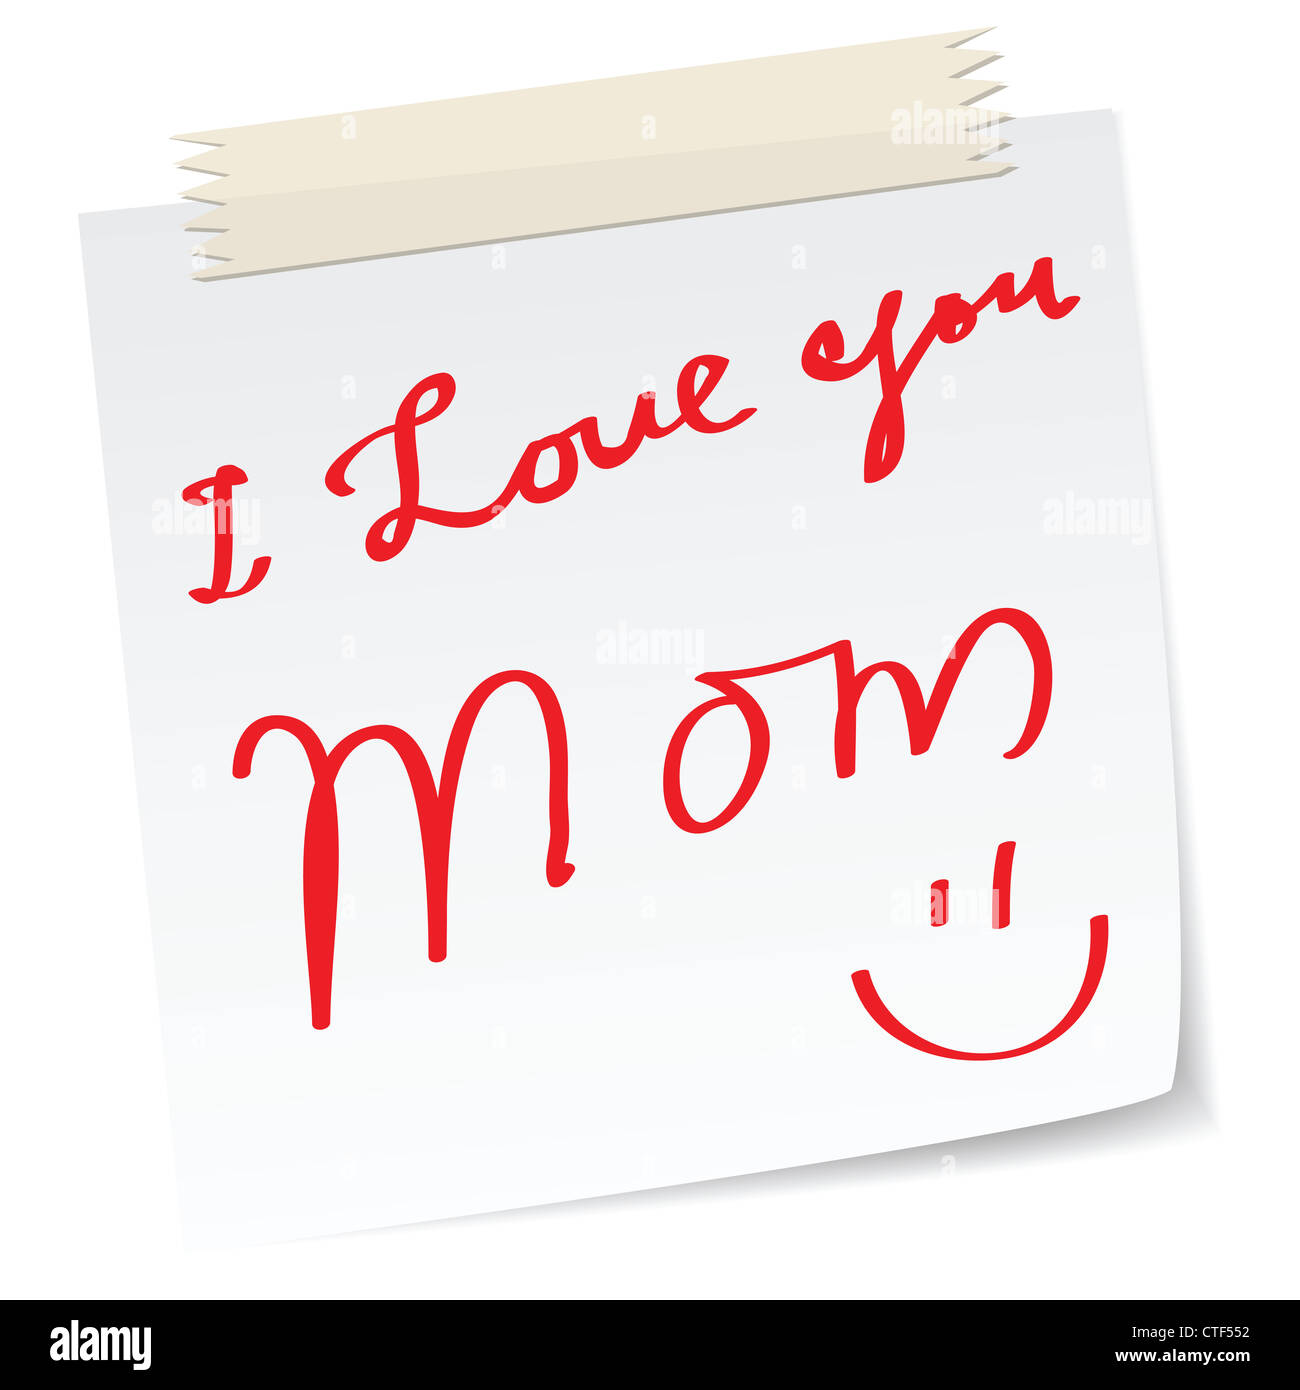 mother day greetings on a paper notes, with handwritten message. Stock Photo